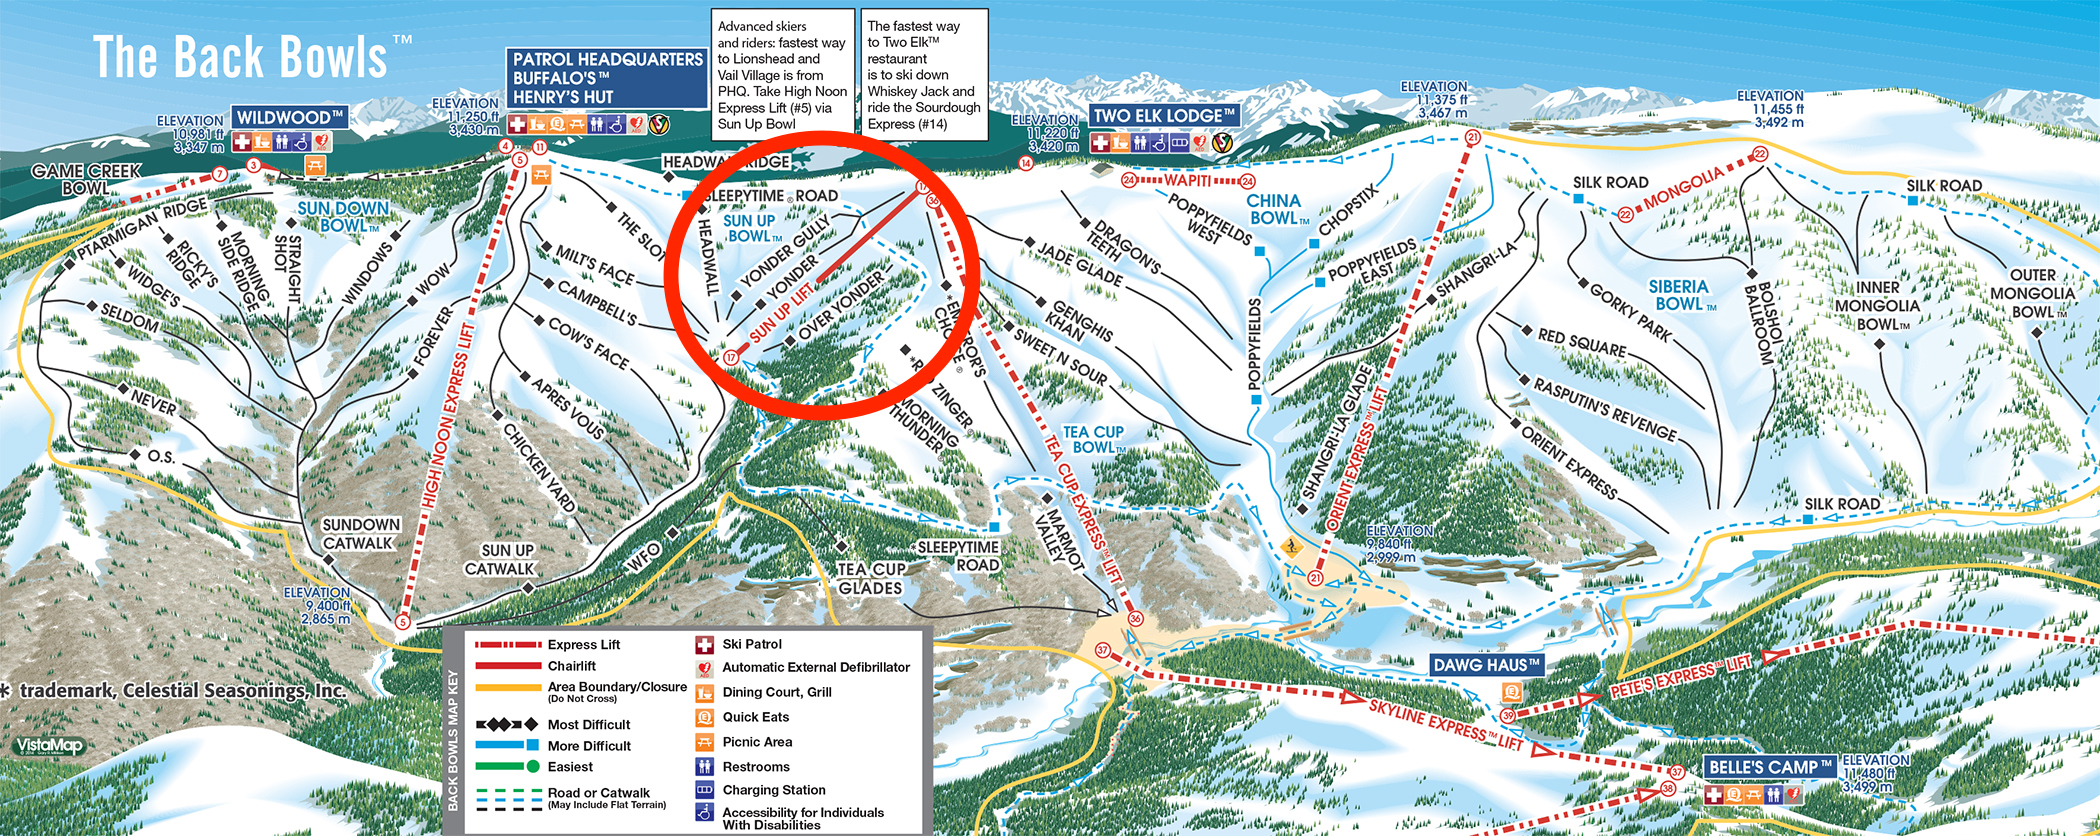 Vail trail map highlighting the Sun Up Lift.